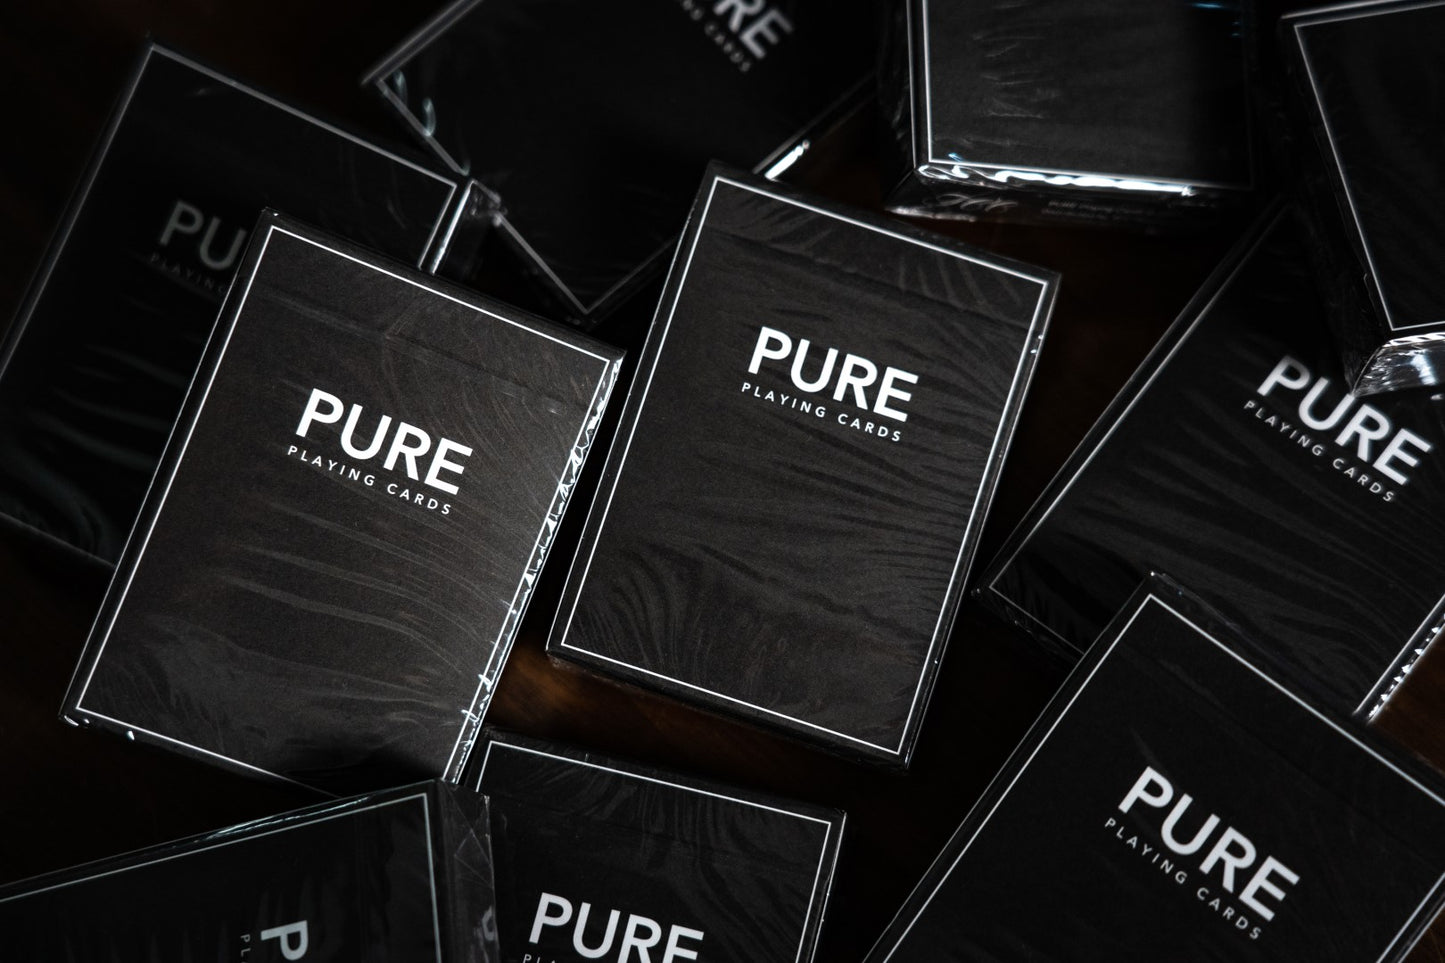 Pure Black Playing Cards by TCC